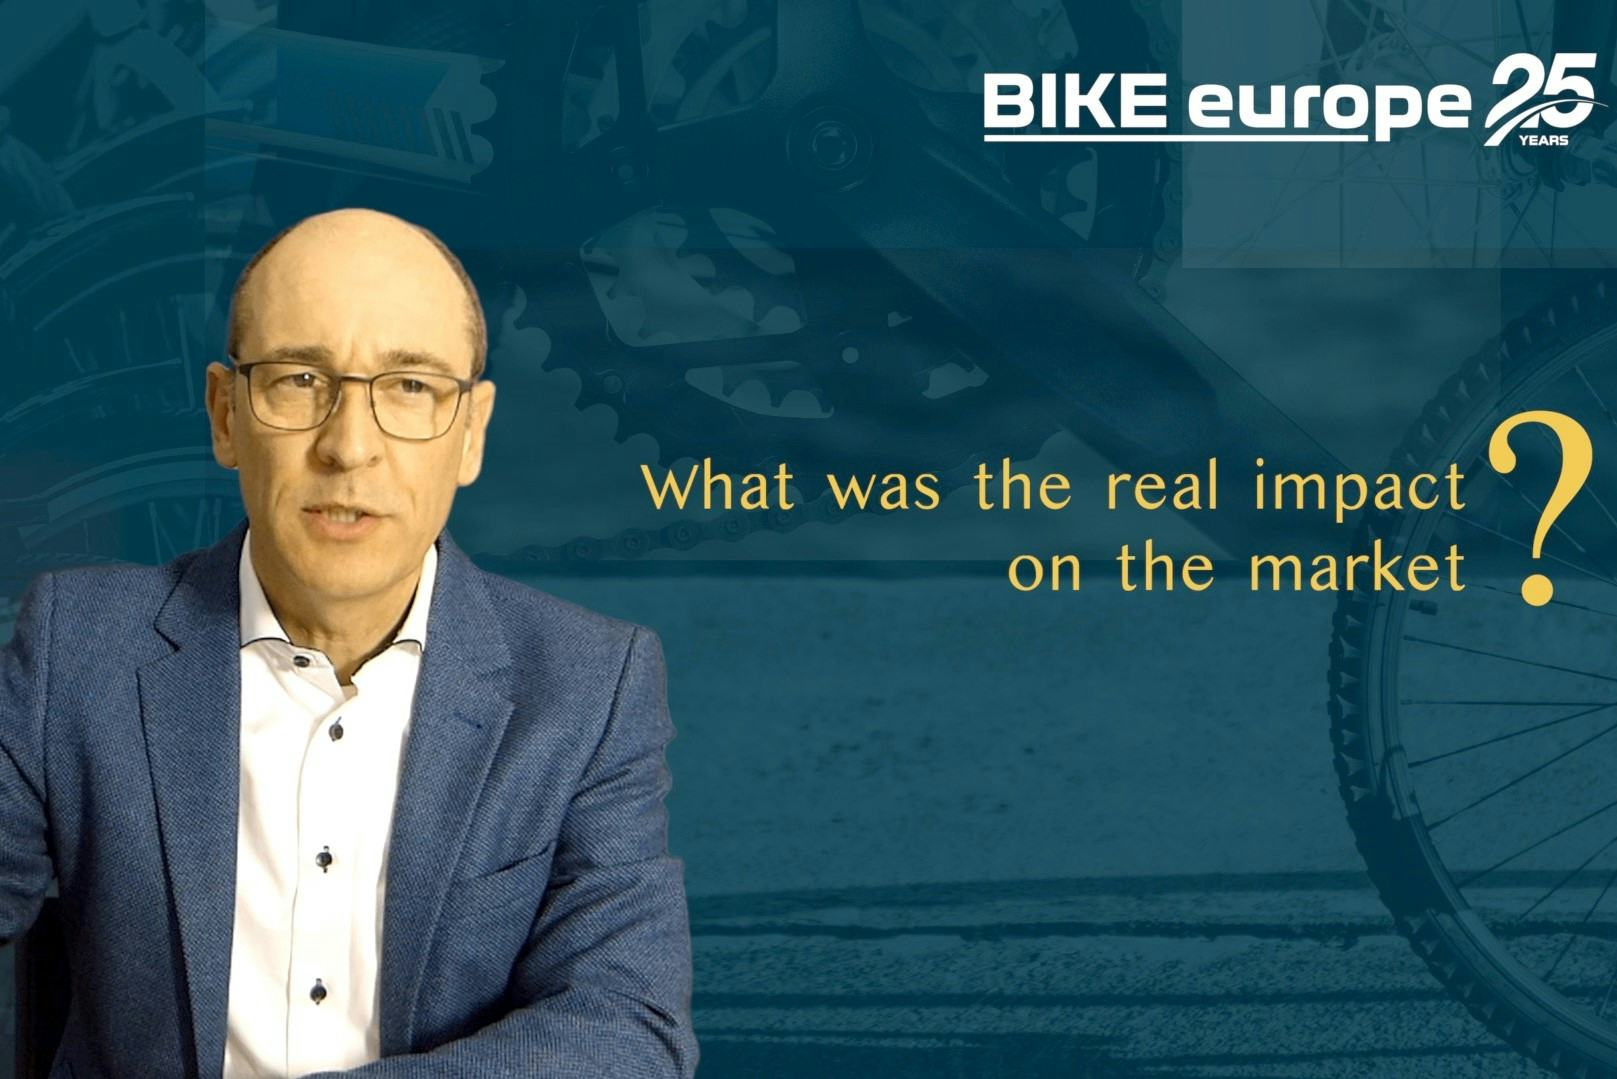 WATCH: What was the real impact of Covid on the 2020 bicycle market?